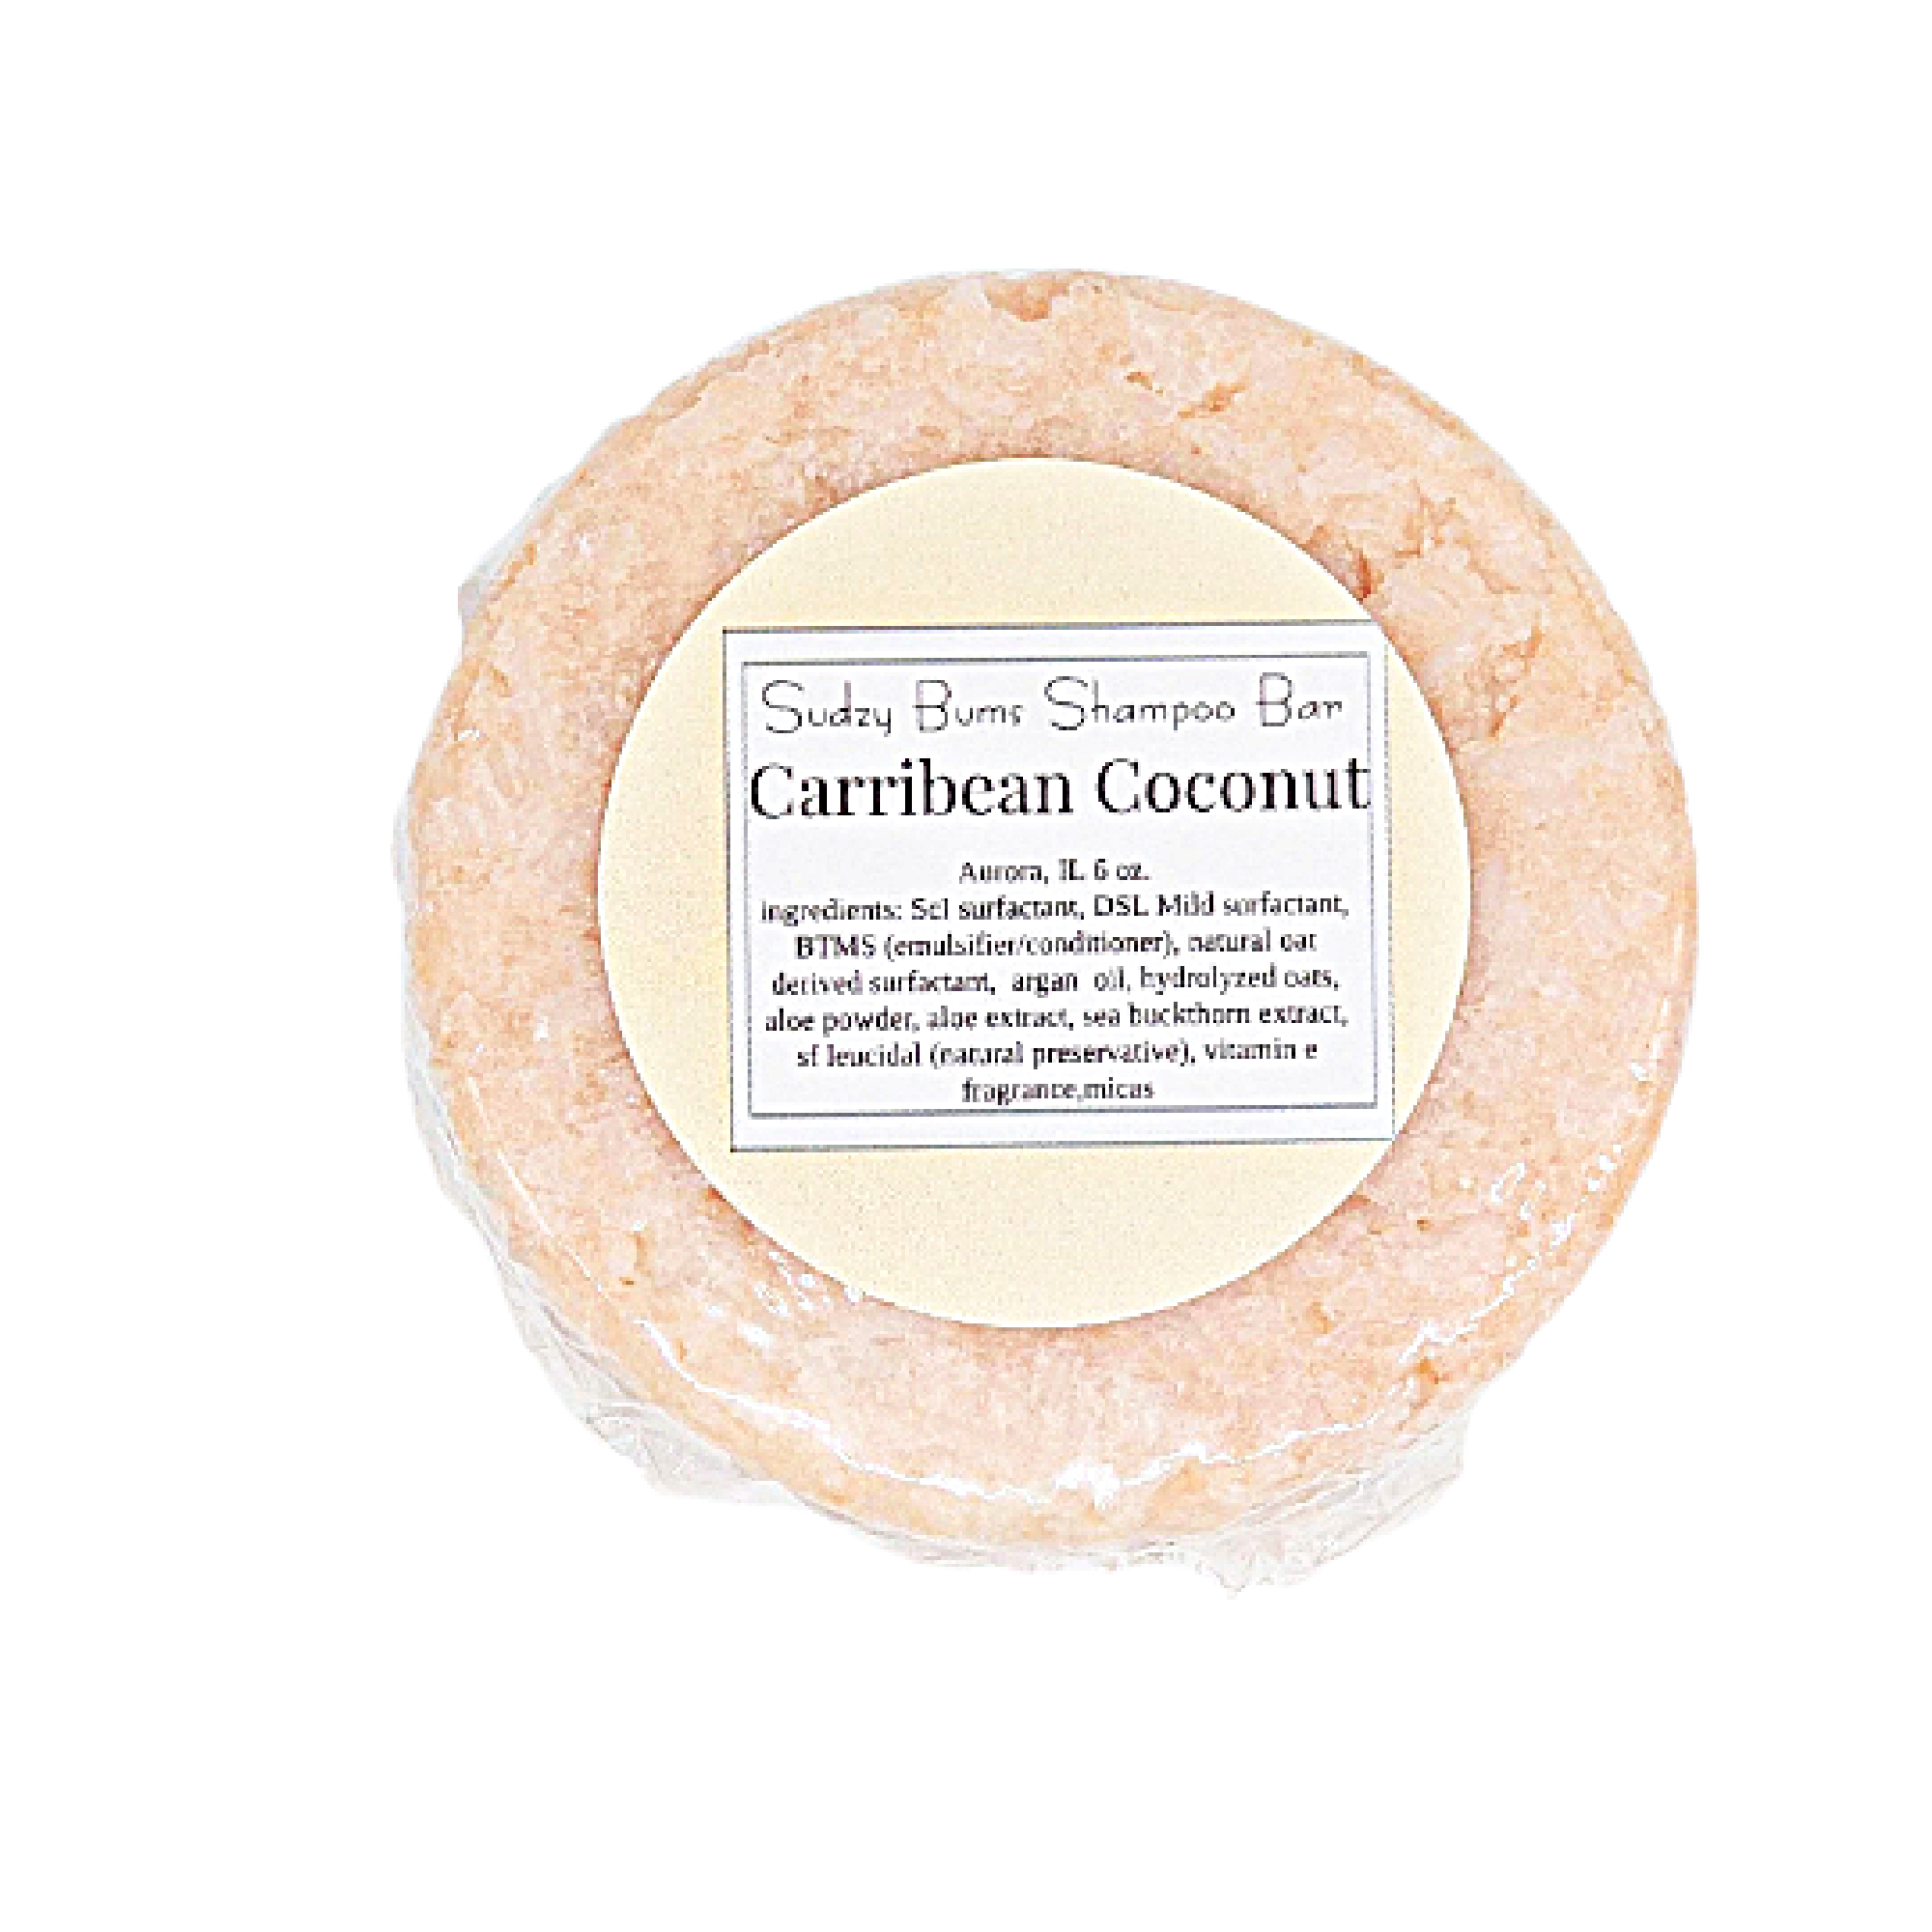 This Carribean Coconut  Shampoo bar is made with love by Sudzy Bums! Shop more unique gift ideas today with Spots Initiatives, the best way to support creators.